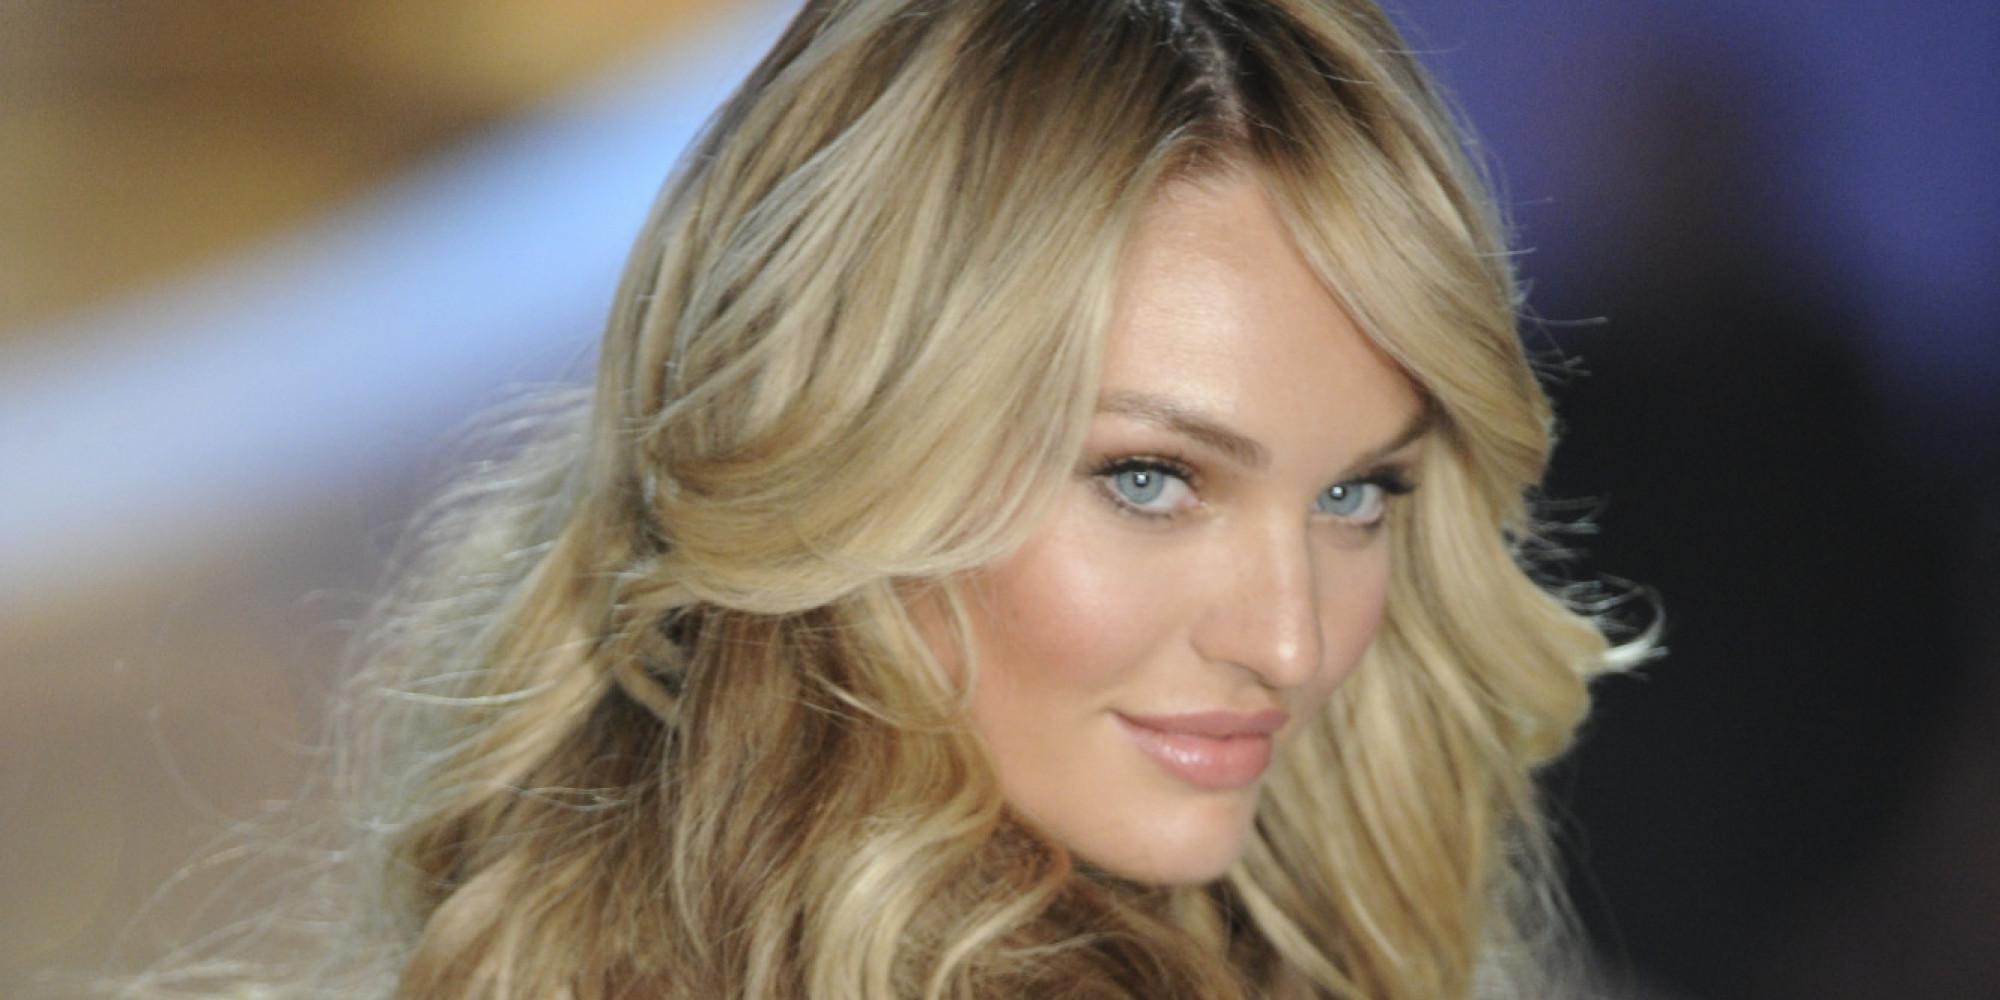 Candice Swanepoel Poses Nude In New Photo Shoot Huffpost 0515